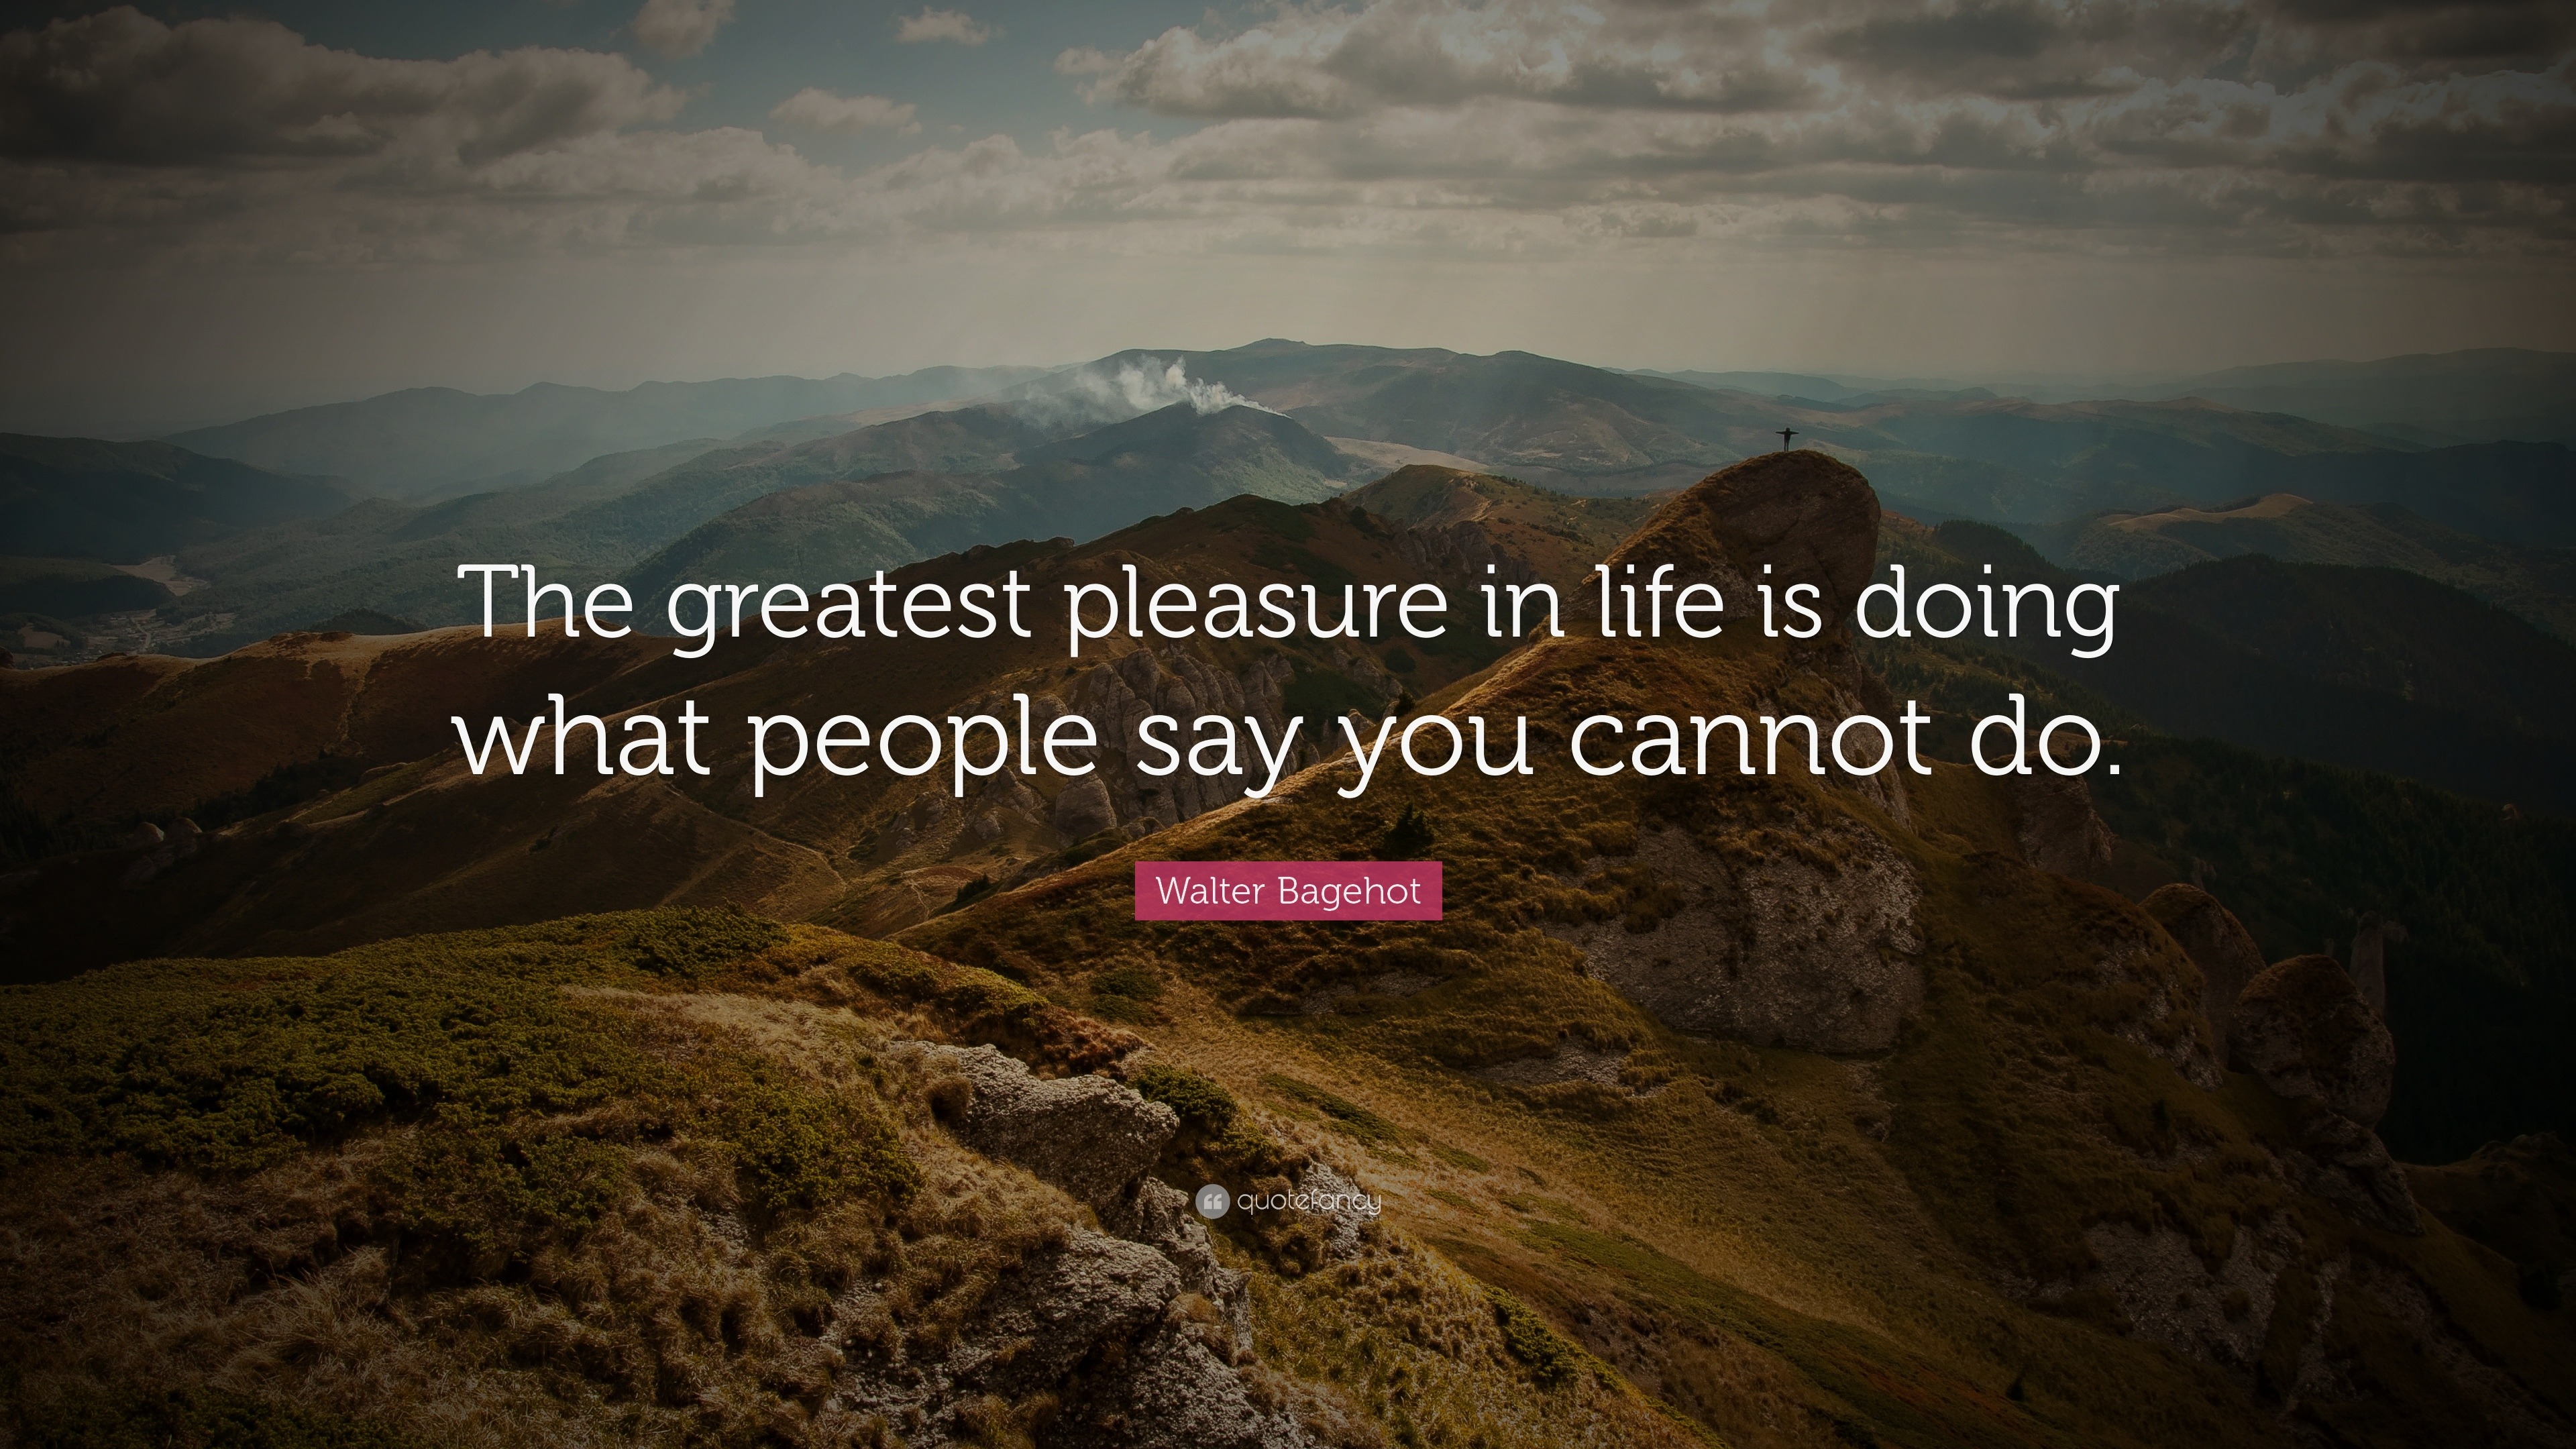 100 Powerful Motivational & Inspirational Quotes About Life